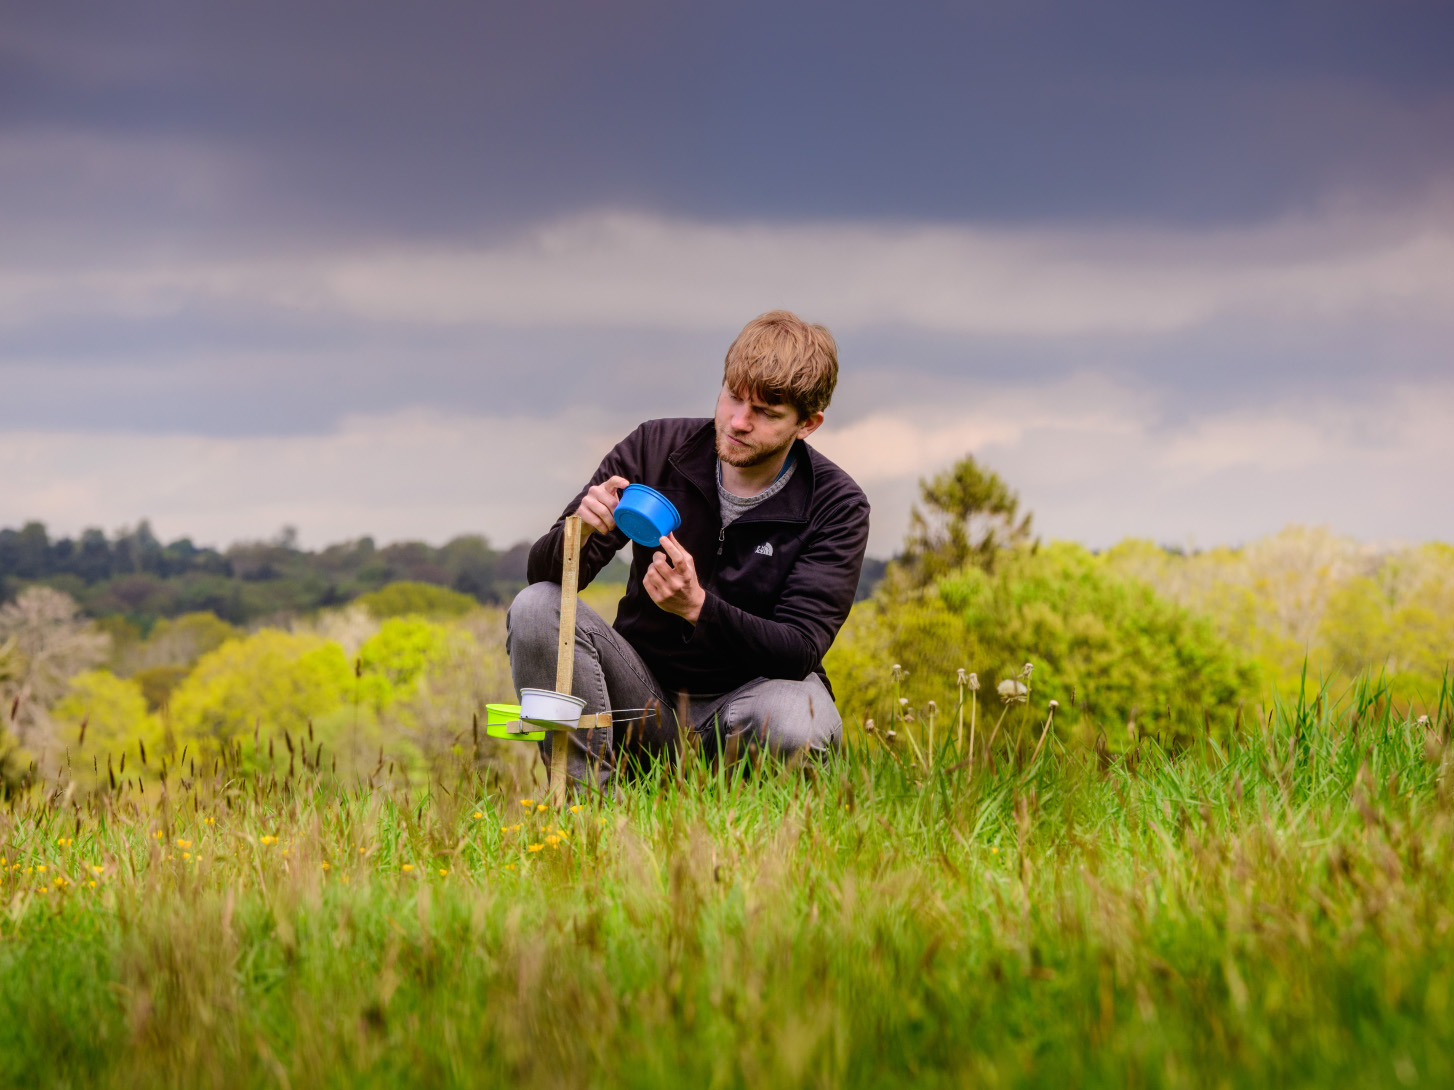 A researcher carrying out work on a research station in a grassy field